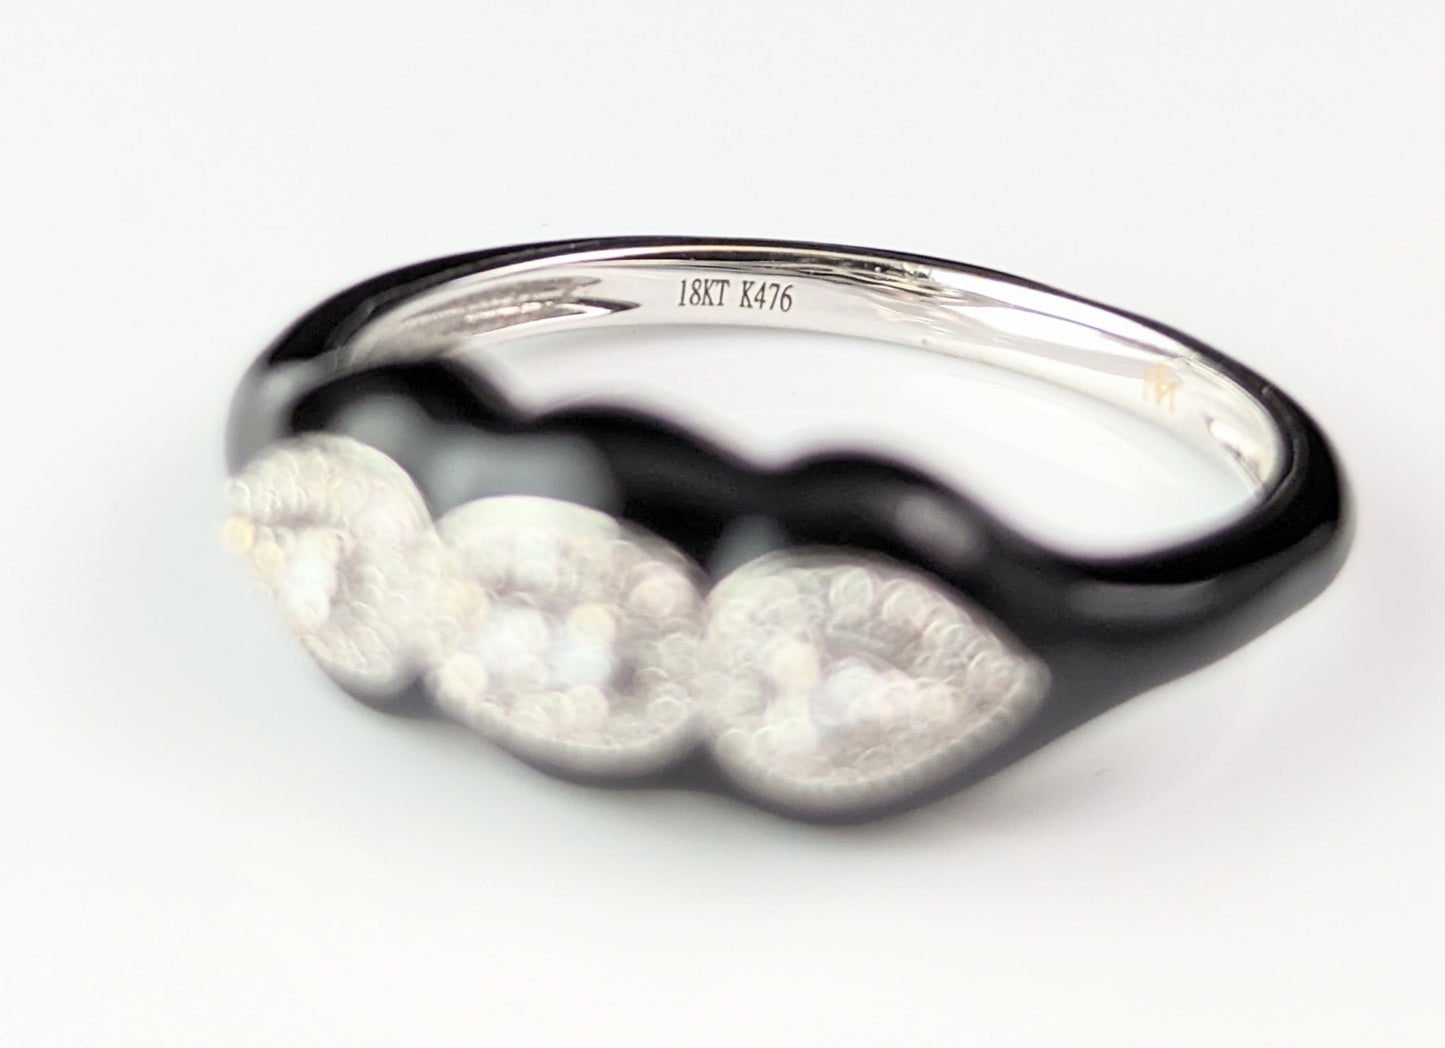 Black enamel and Diamond ring, 18ct white gold, Contemporary